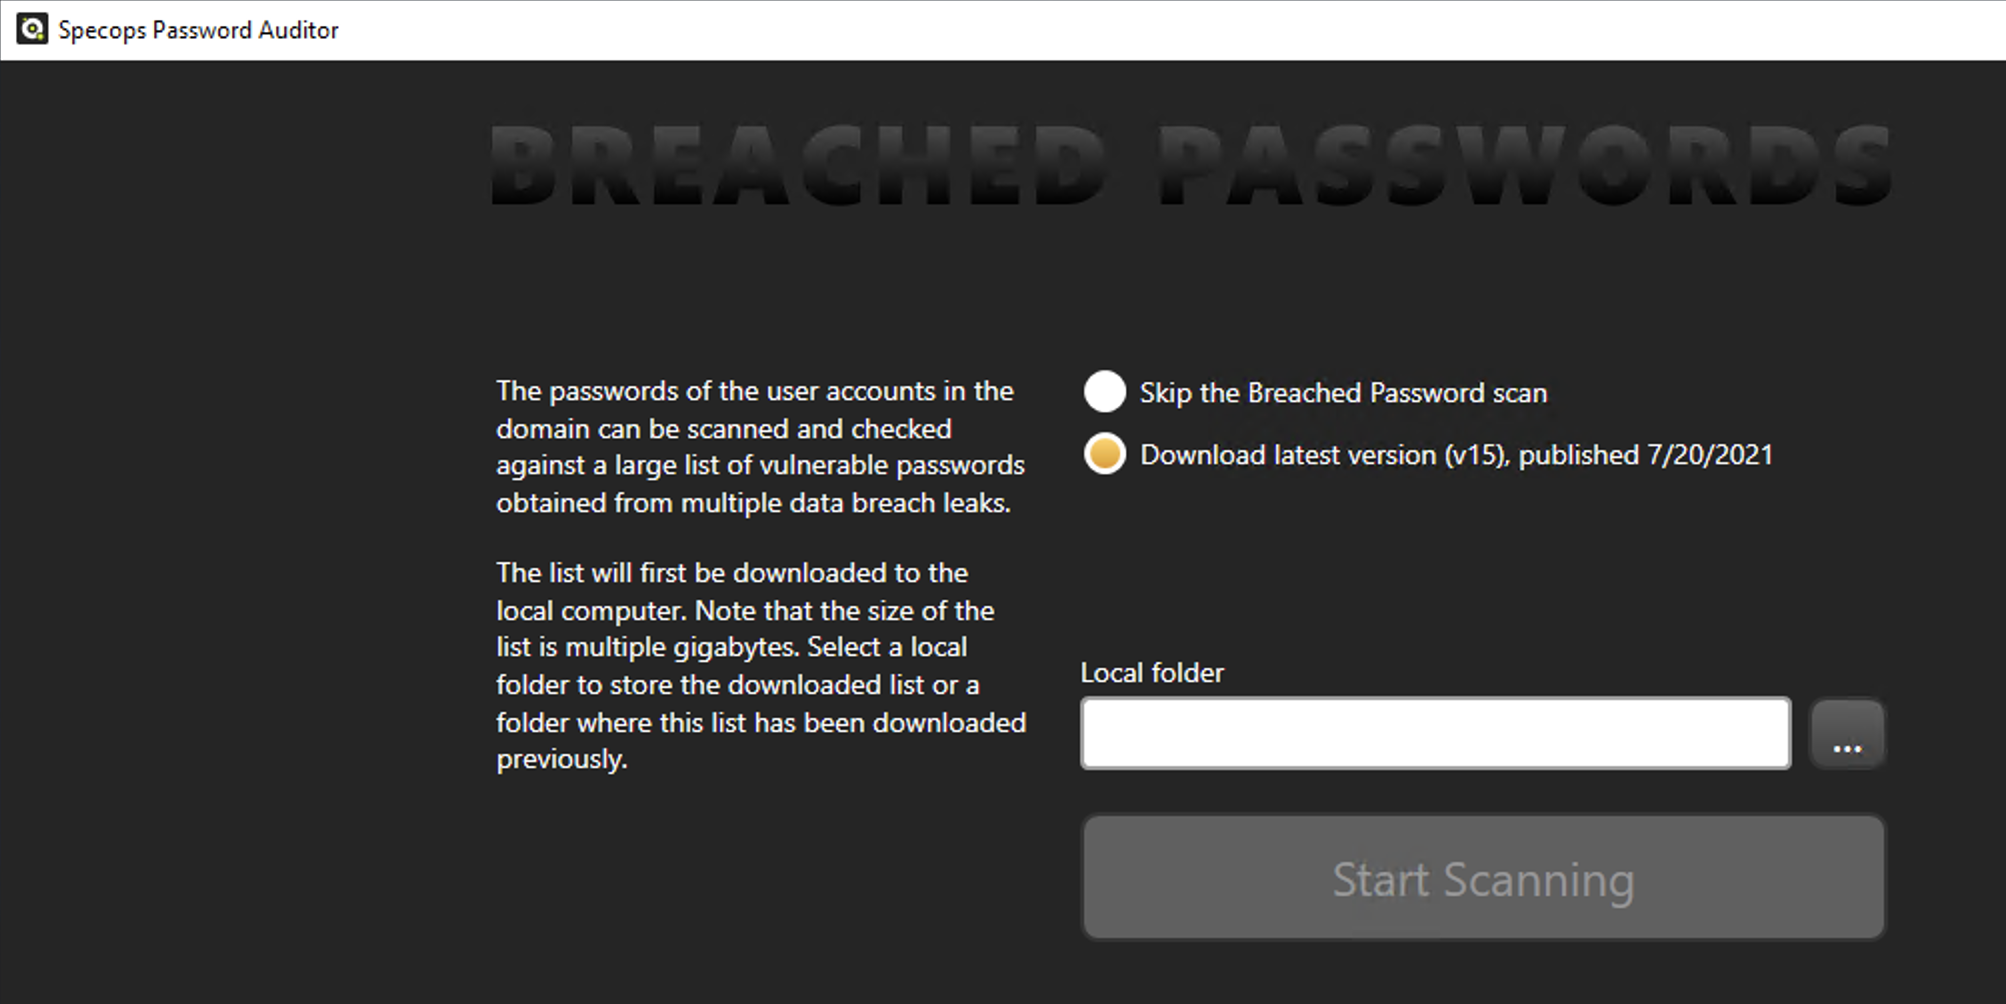 ability to compare known-breached passwords against your AD passwords